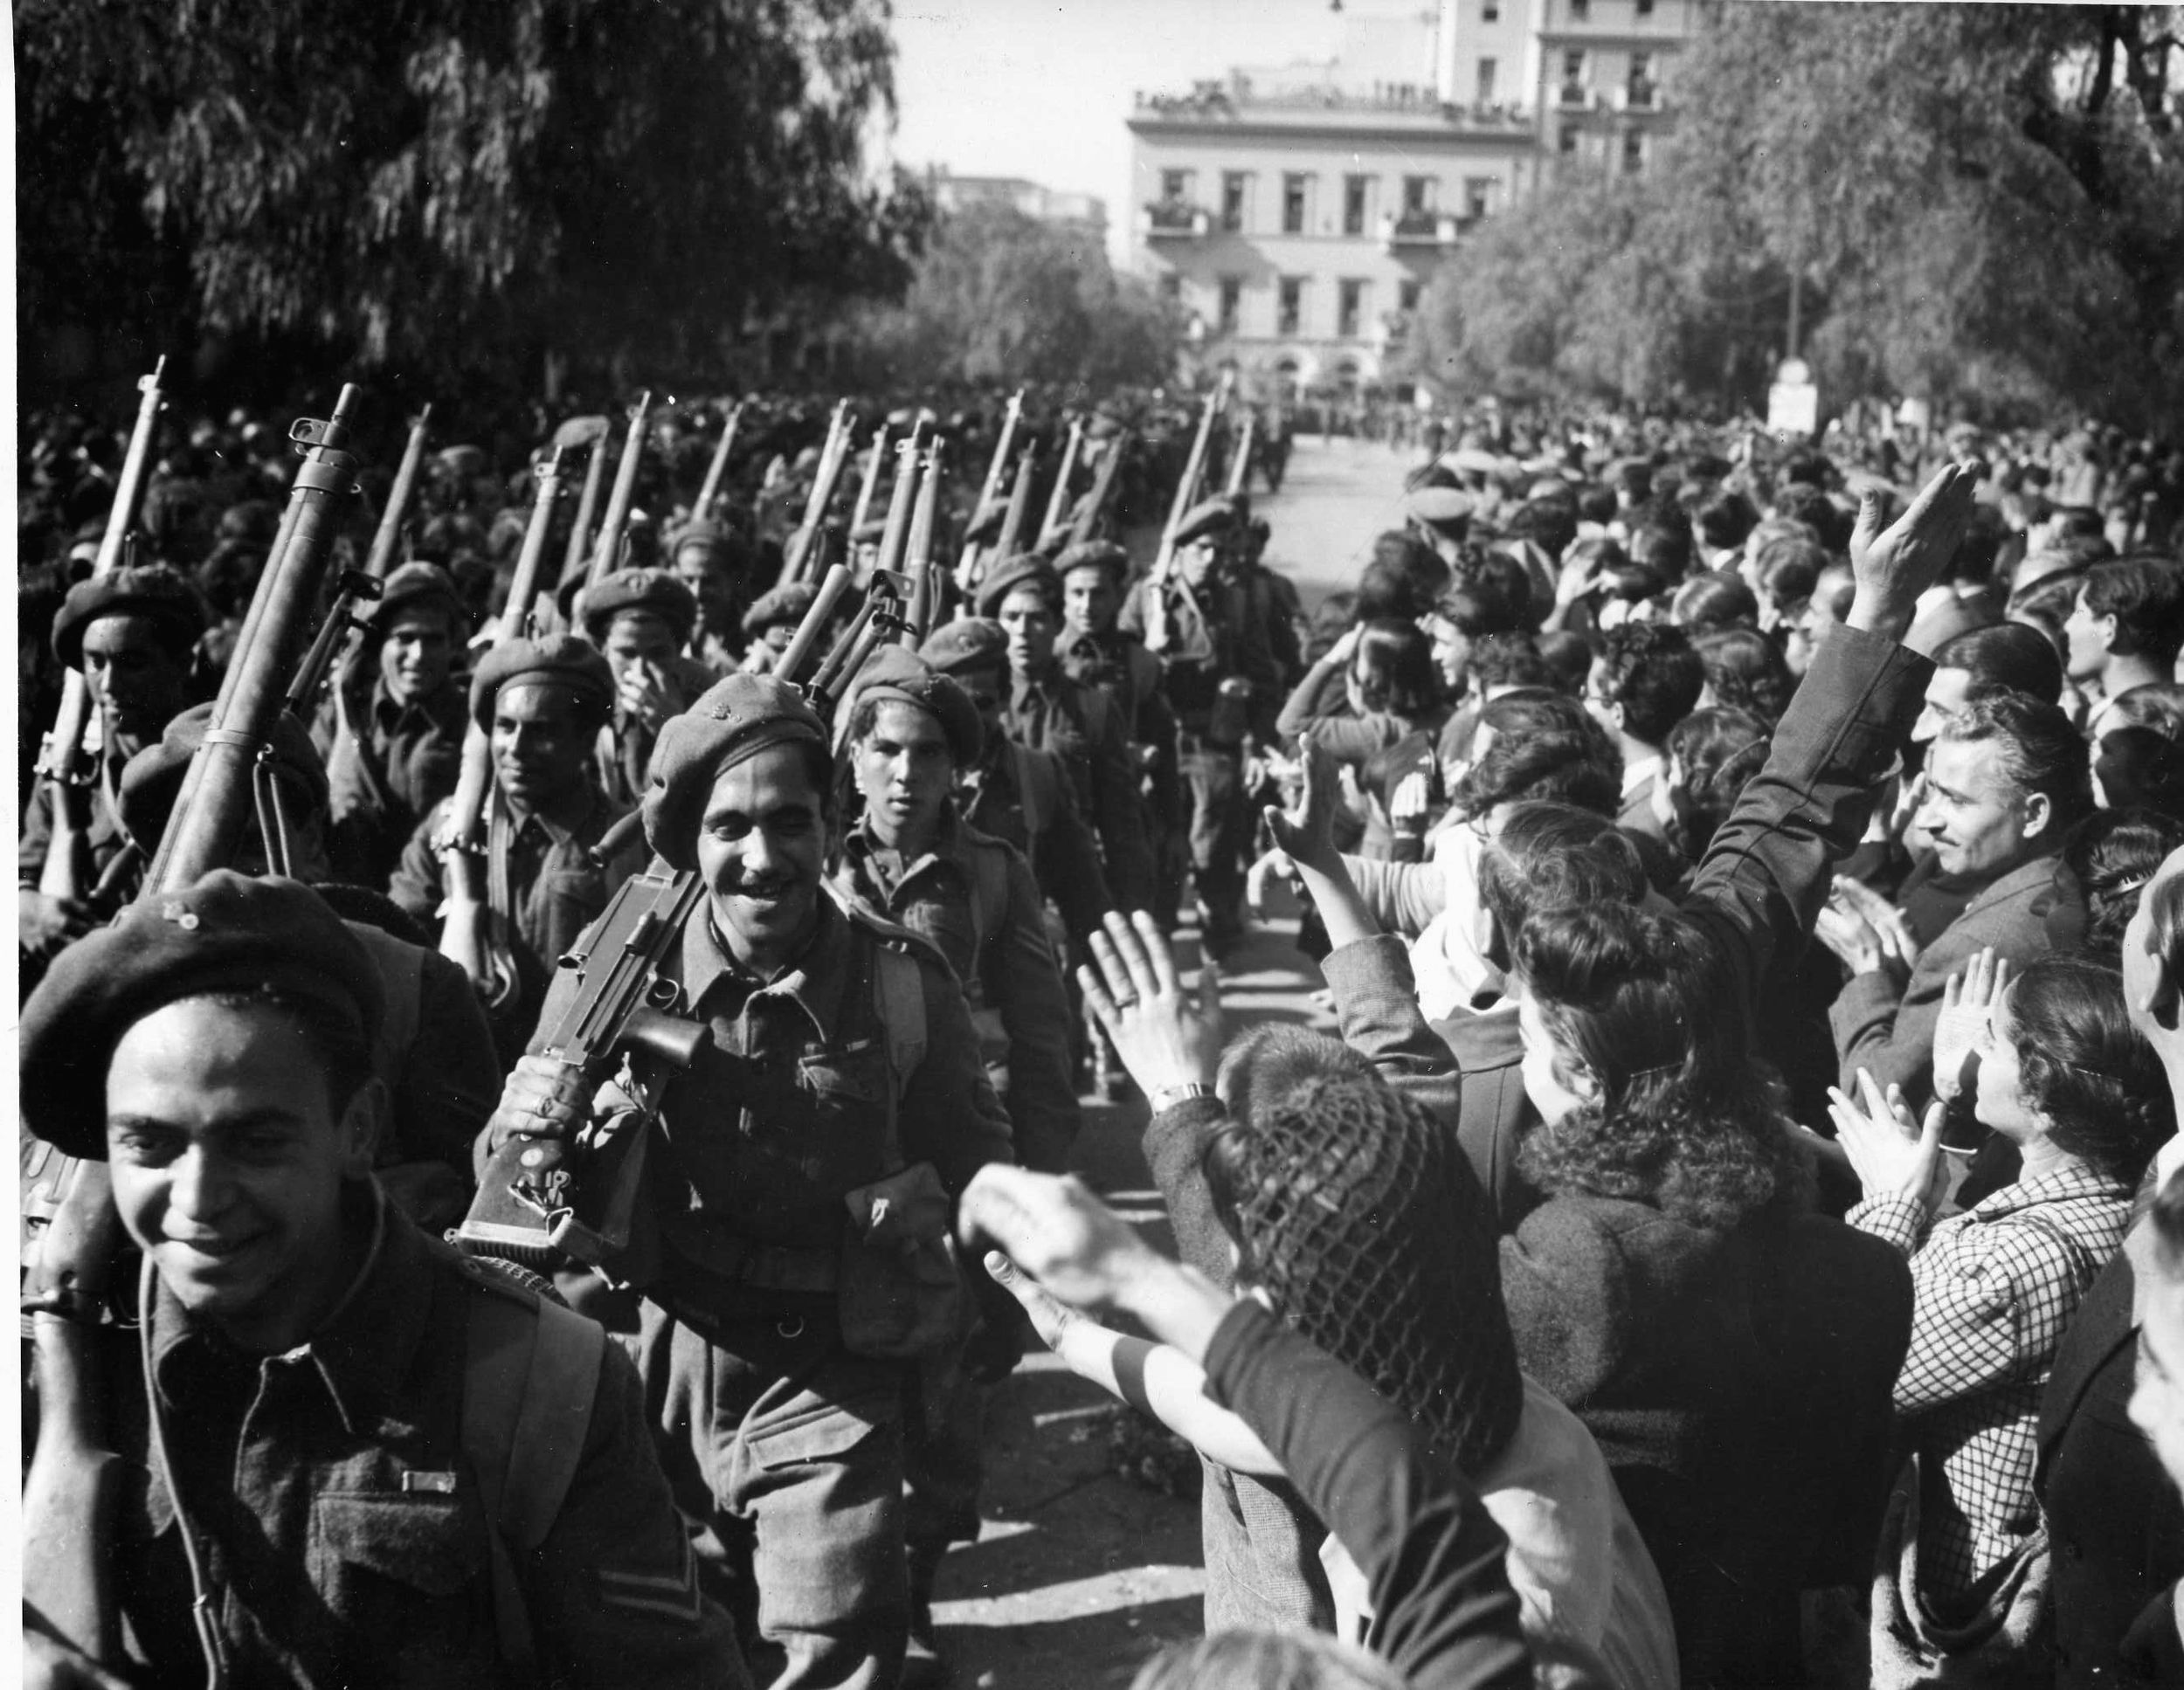 Shortly after their arrival in their native country from Italy, soldiers of the Greek Mountain Brigade receive a hero’s welcome as they parade through the streets of Athens. 